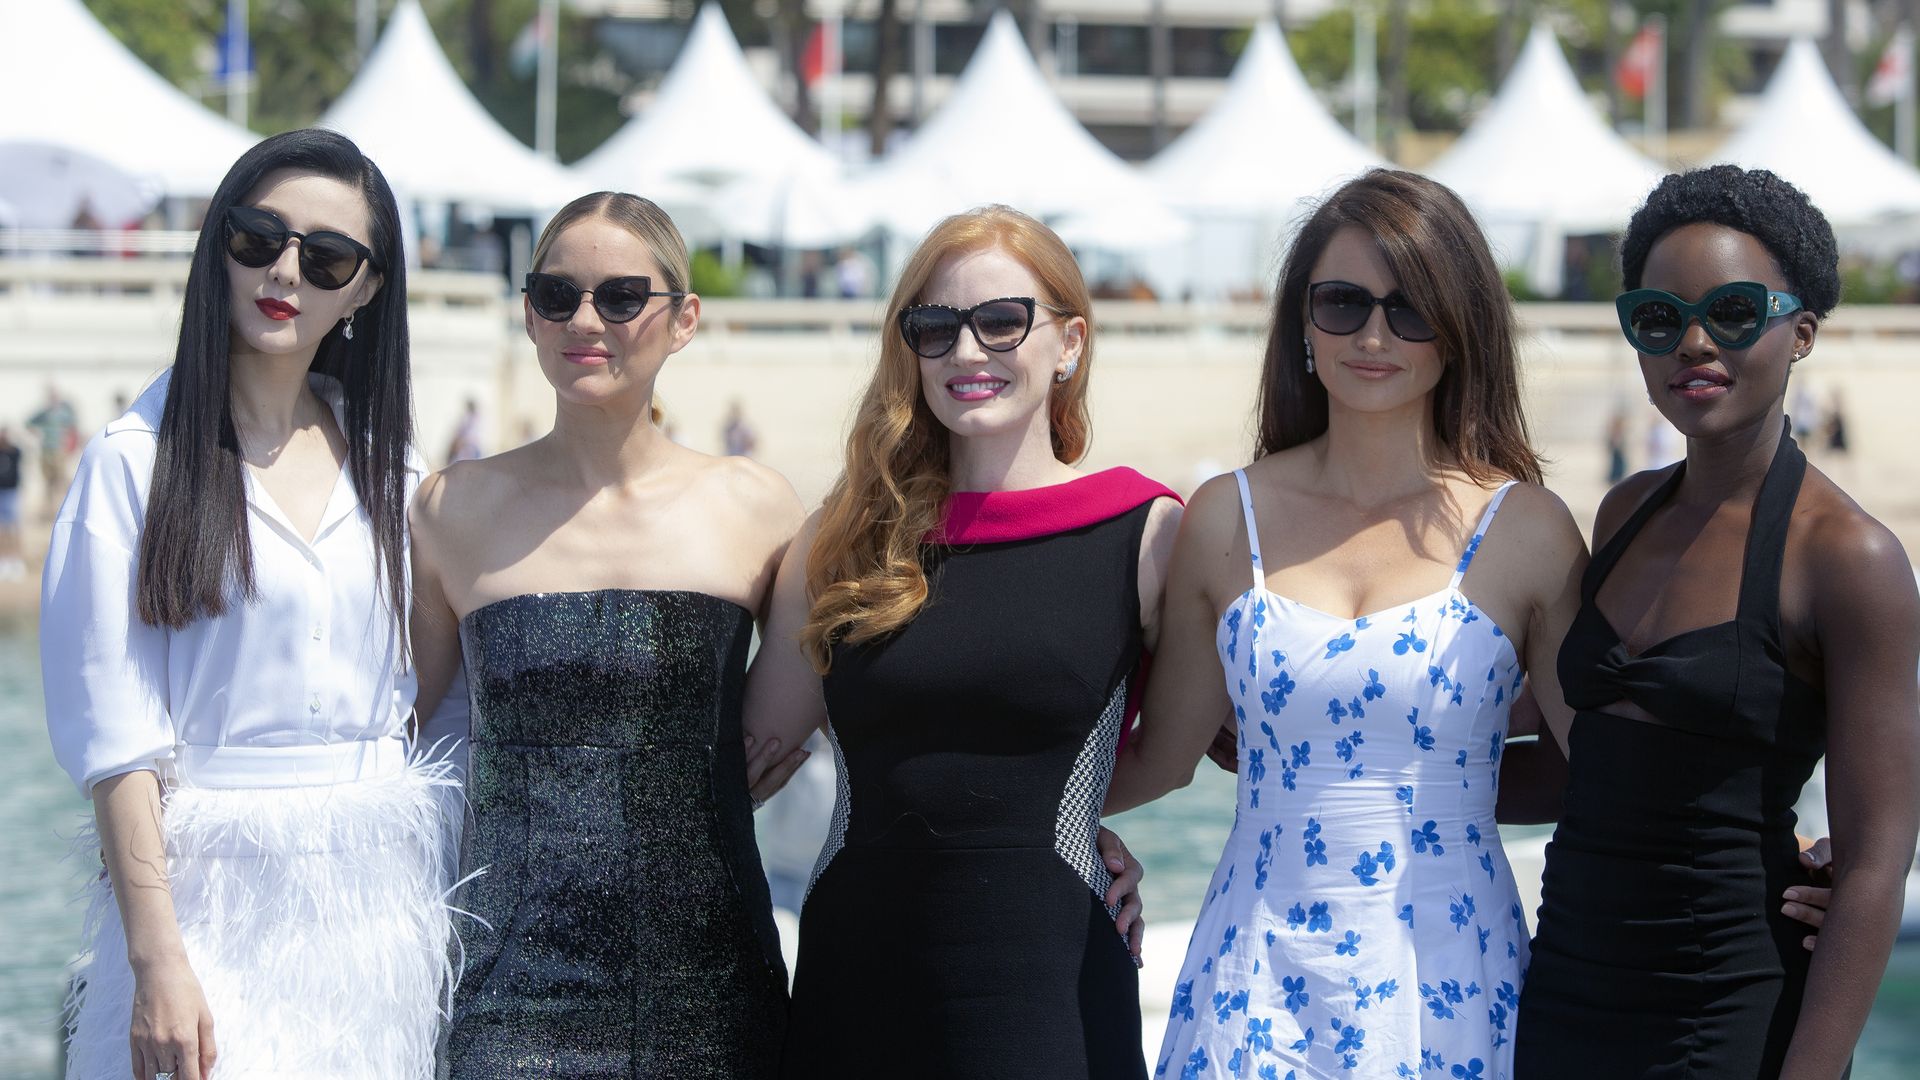 Penelope Cruz, Marion Cotillard, Jessica Chastain, Lupita Nyong'o and Fan Bingbing attend the photocall for '355' during the 71st annual Cannes Film Festival